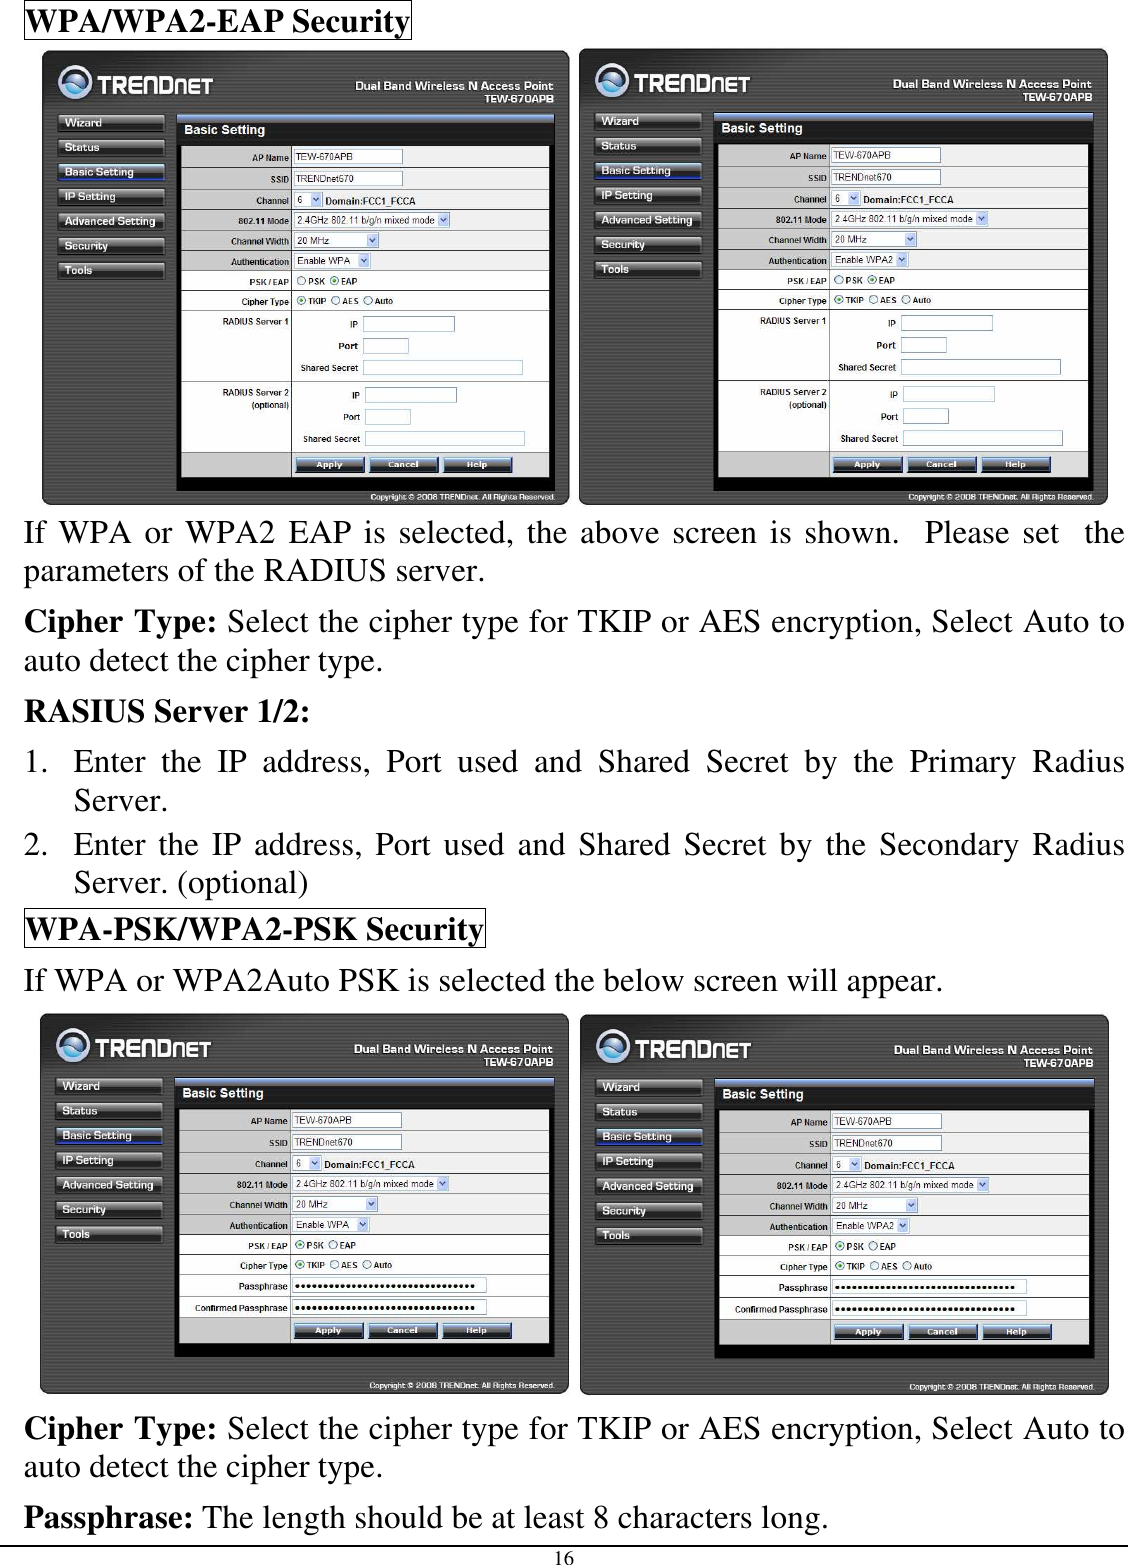  16 WPA/WPA2-EAP Security    If WPA or WPA2 EAP is selected, the above screen is shown.  Please set  the parameters of the RADIUS server. Cipher Type: Select the cipher type for TKIP or AES encryption, Select Auto to auto detect the cipher type.  RASIUS Server 1/2: 1. Enter  the  IP  address,  Port  used  and  Shared  Secret  by  the  Primary  Radius Server. 2. Enter the IP address, Port used and Shared Secret by the Secondary Radius Server. (optional) WPA-PSK/WPA2-PSK Security If WPA or WPA2Auto PSK is selected the below screen will appear.    Cipher Type: Select the cipher type for TKIP or AES encryption, Select Auto to auto detect the cipher type.  Passphrase: The length should be at least 8 characters long.  